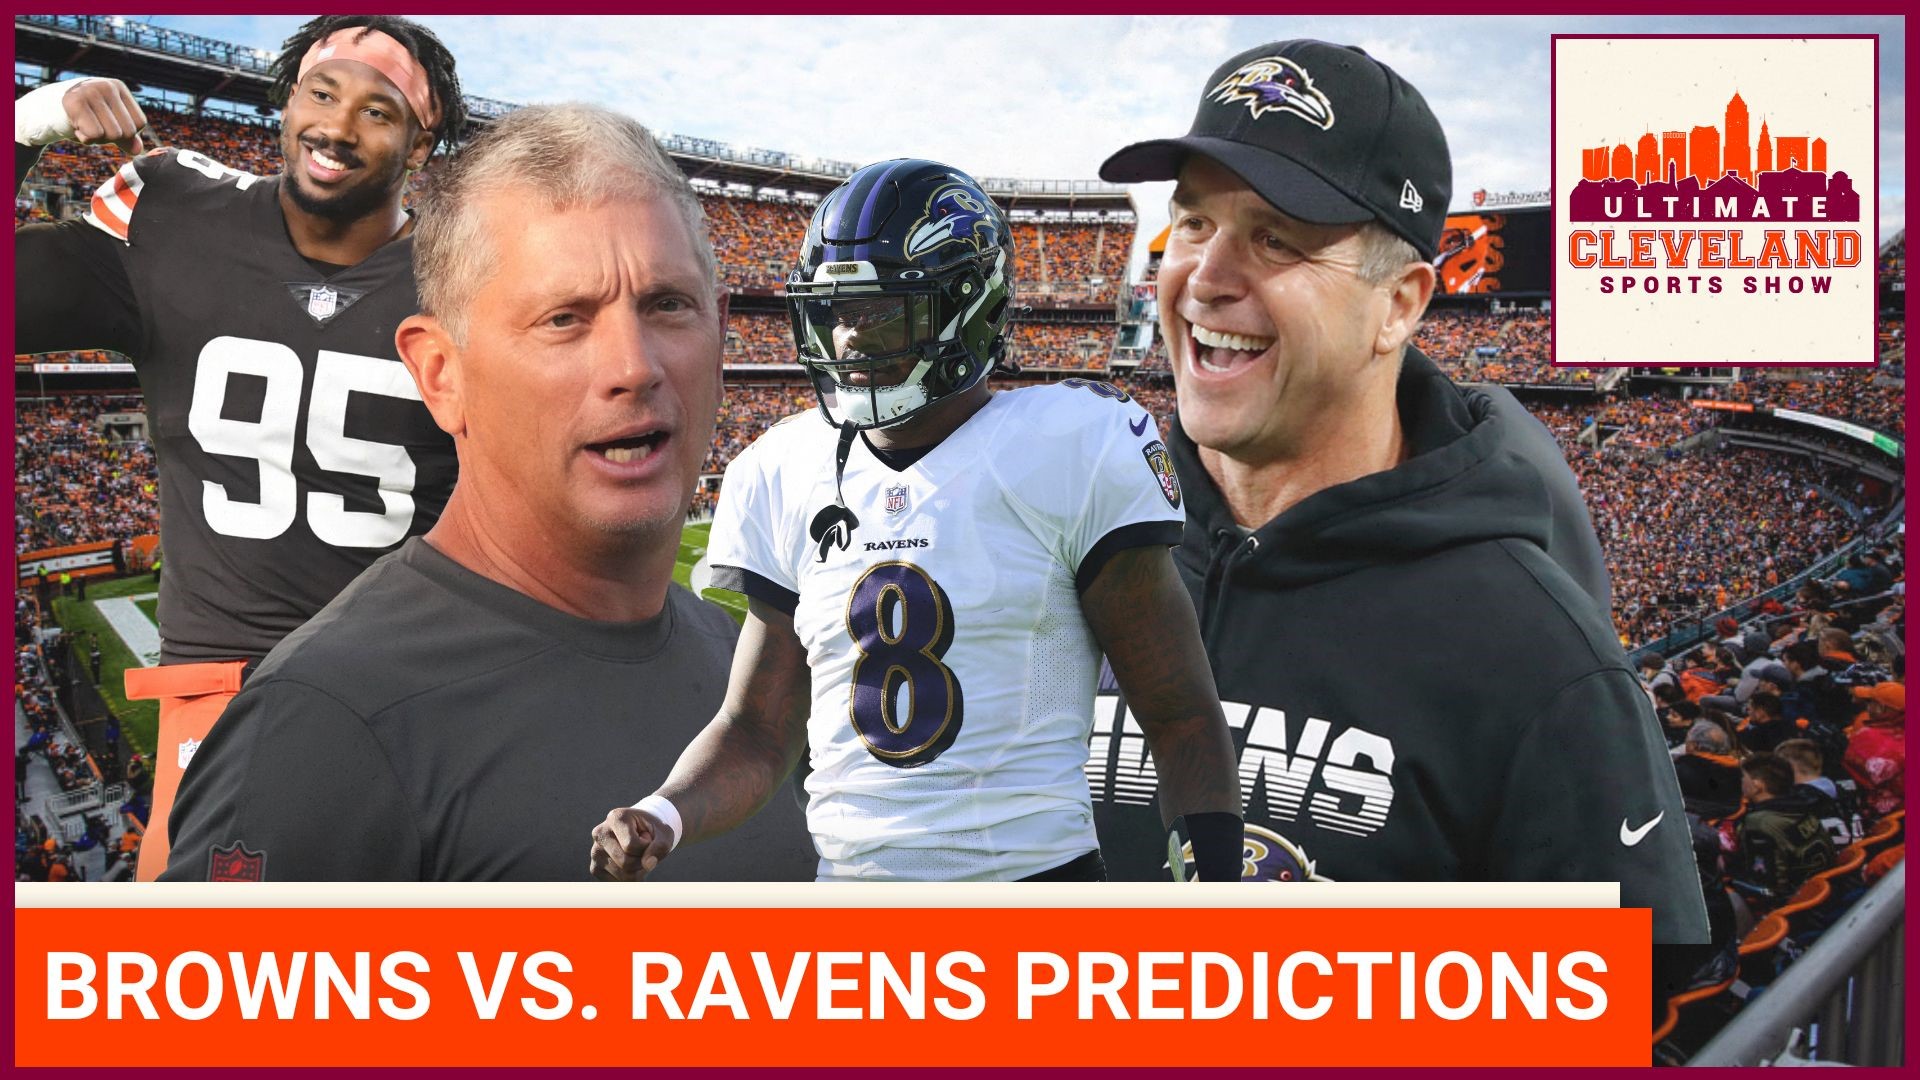 Cleveland Browns vs. Baltimore Ravens final thoughts and predictions